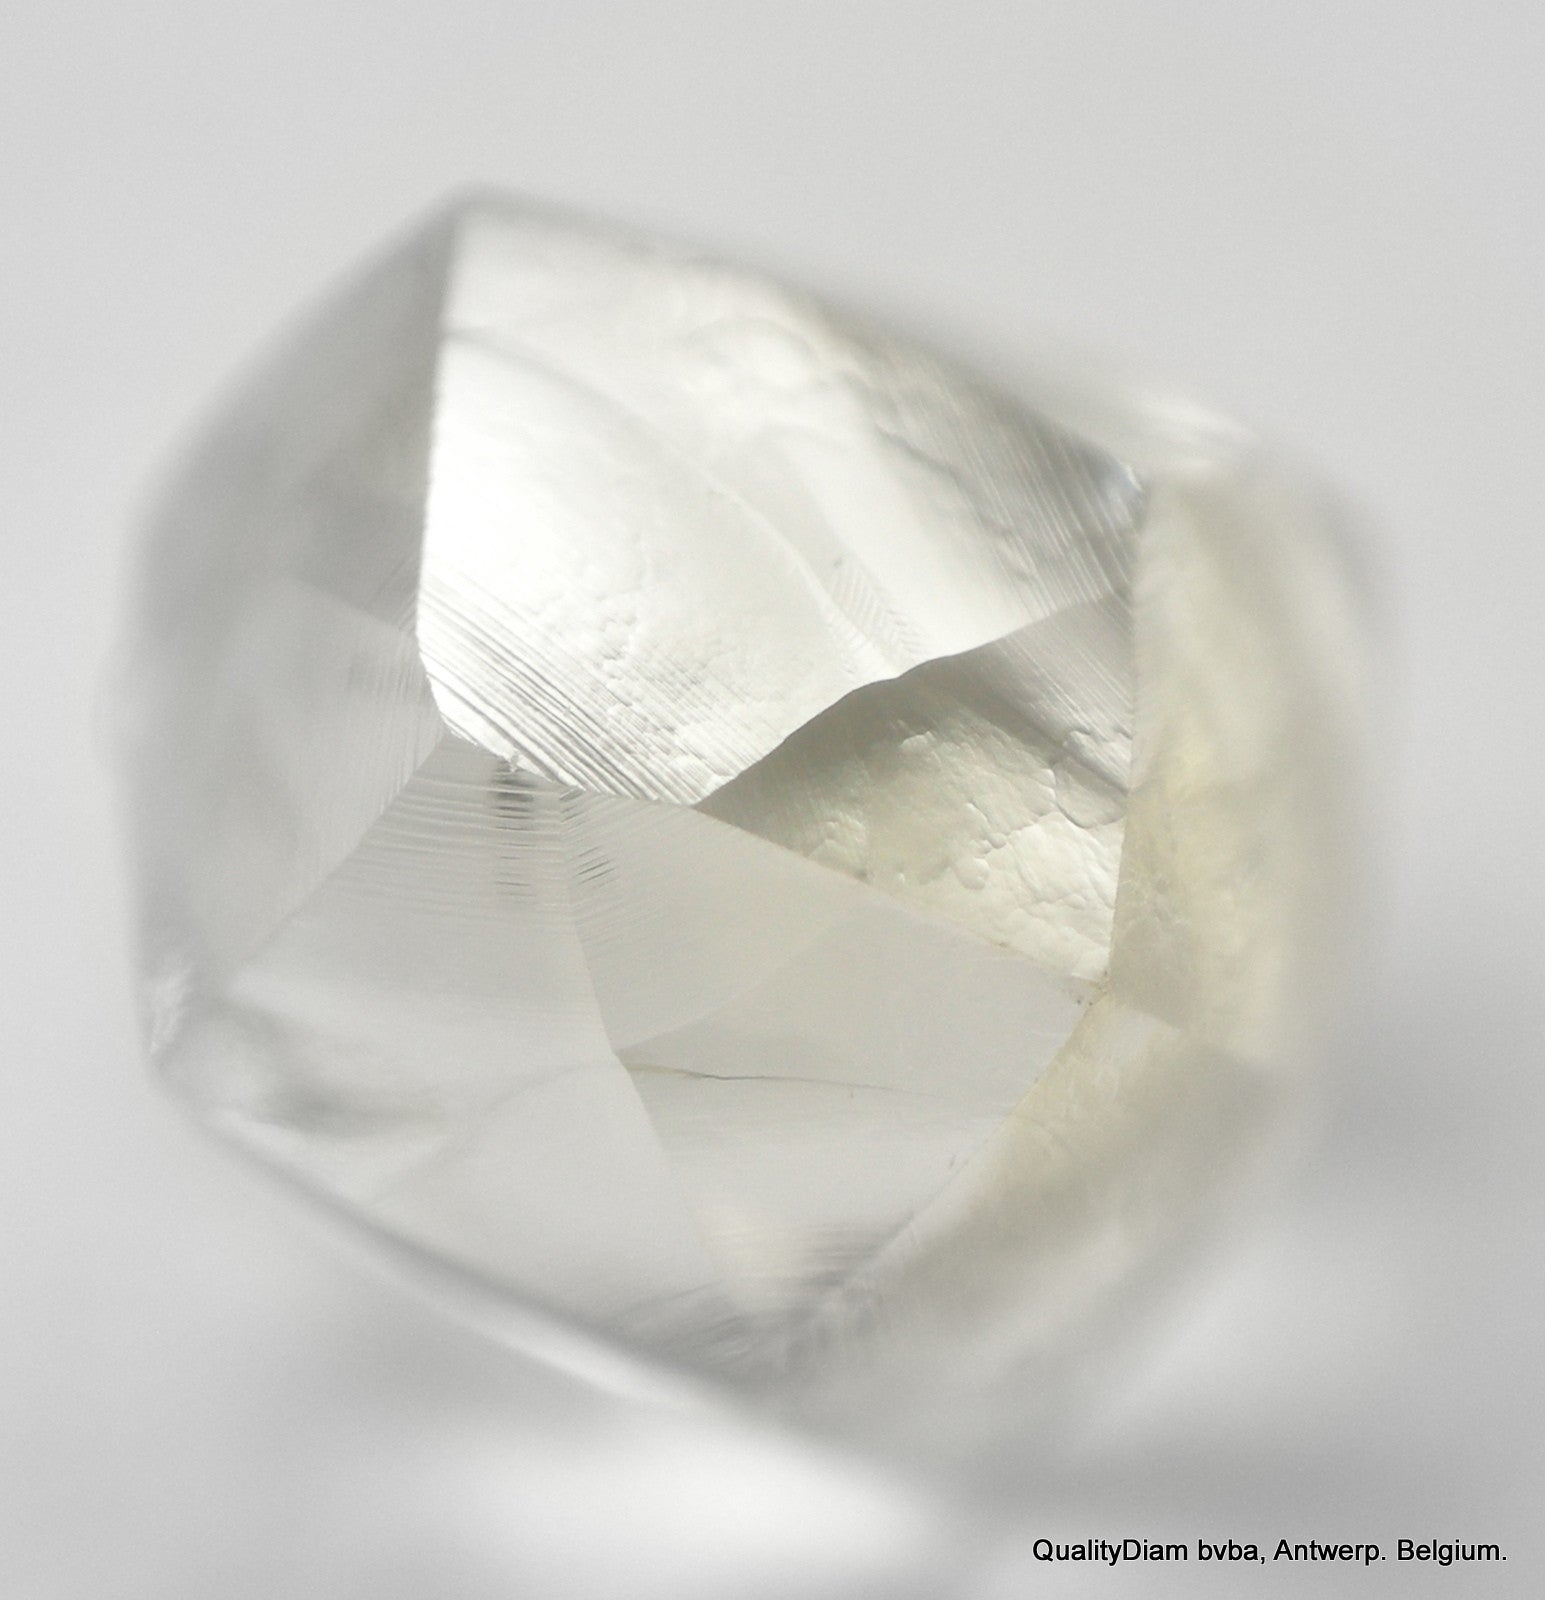 I SI1 0.51 CARAT Natural Uncut Raw Diamond with Gem feel and touch